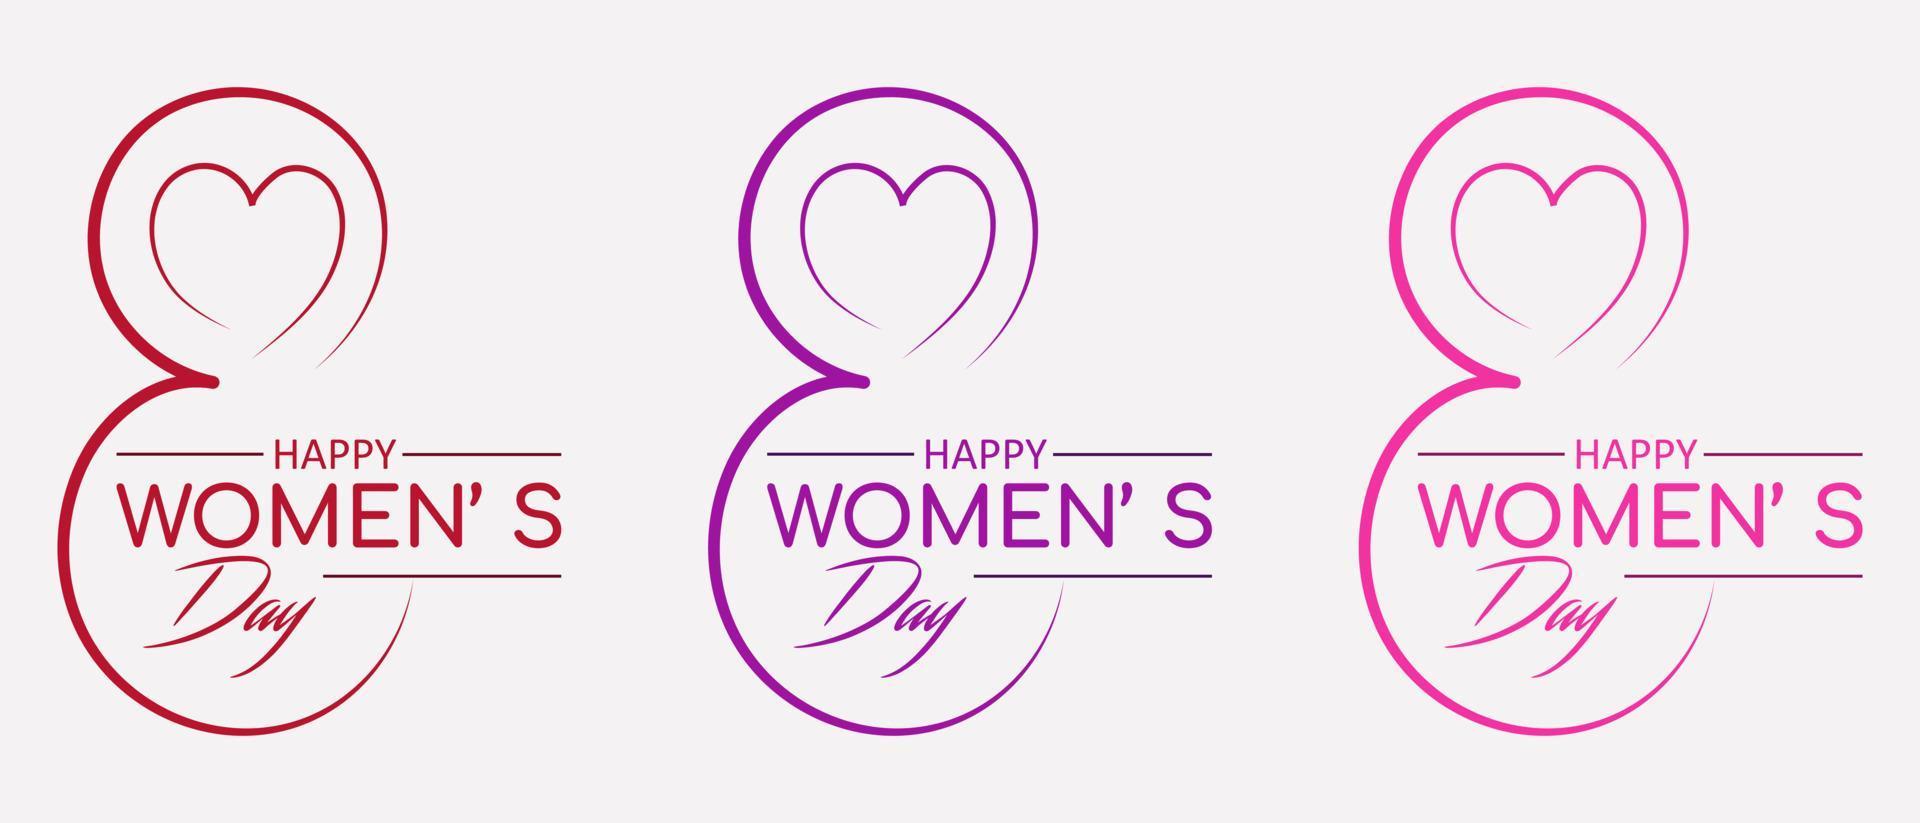 Collection of inscriptions with a design for the international women's day on March 8. vector